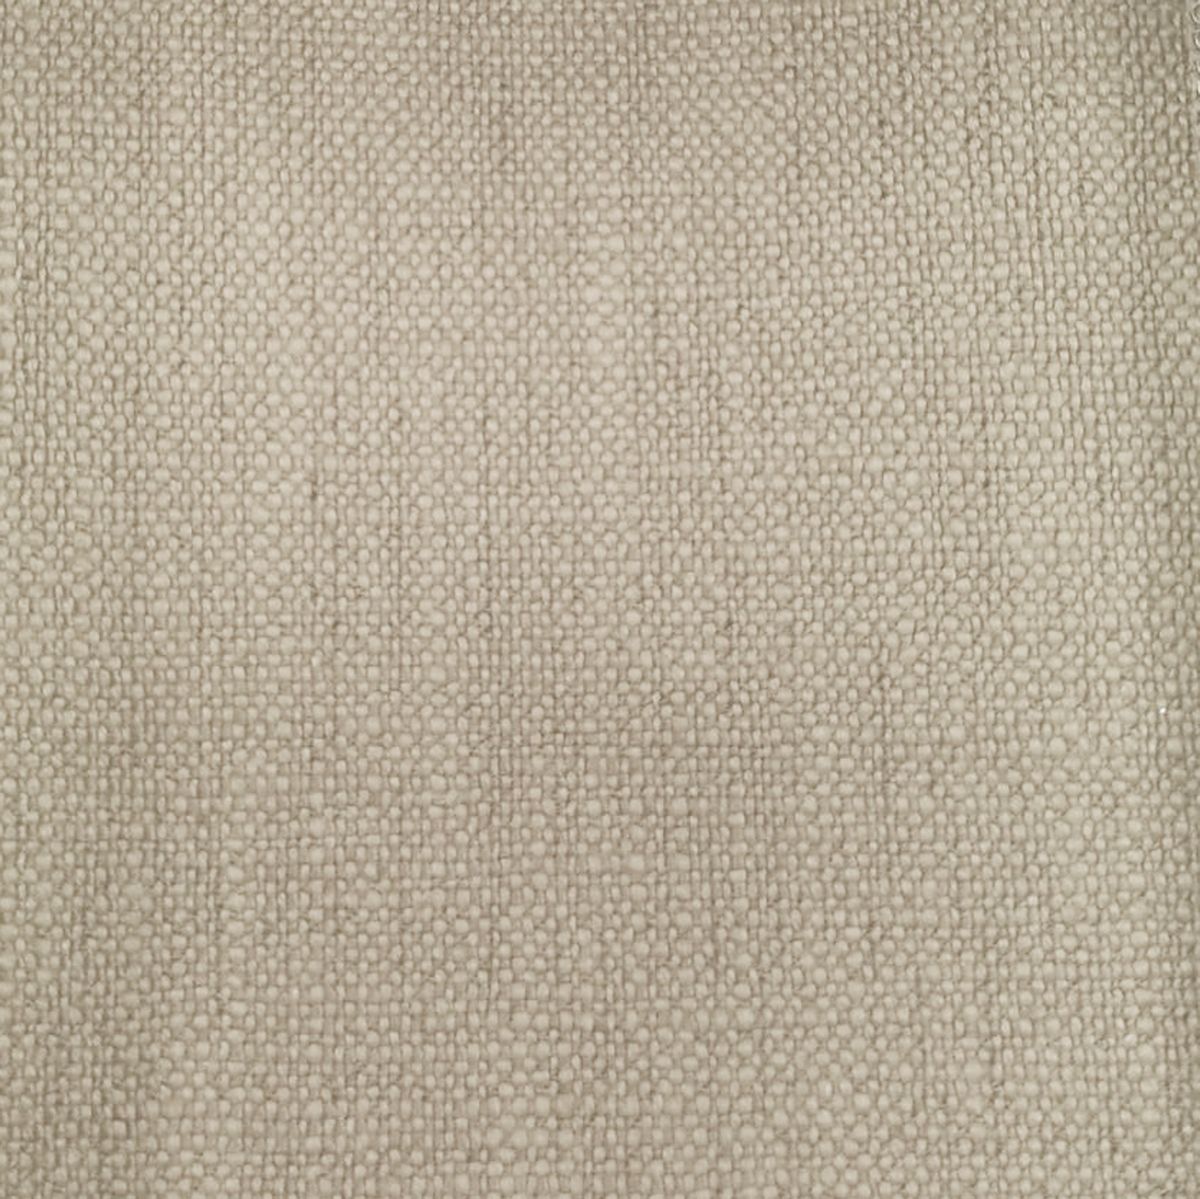 Trento Sand Fabric by Voyage Maison